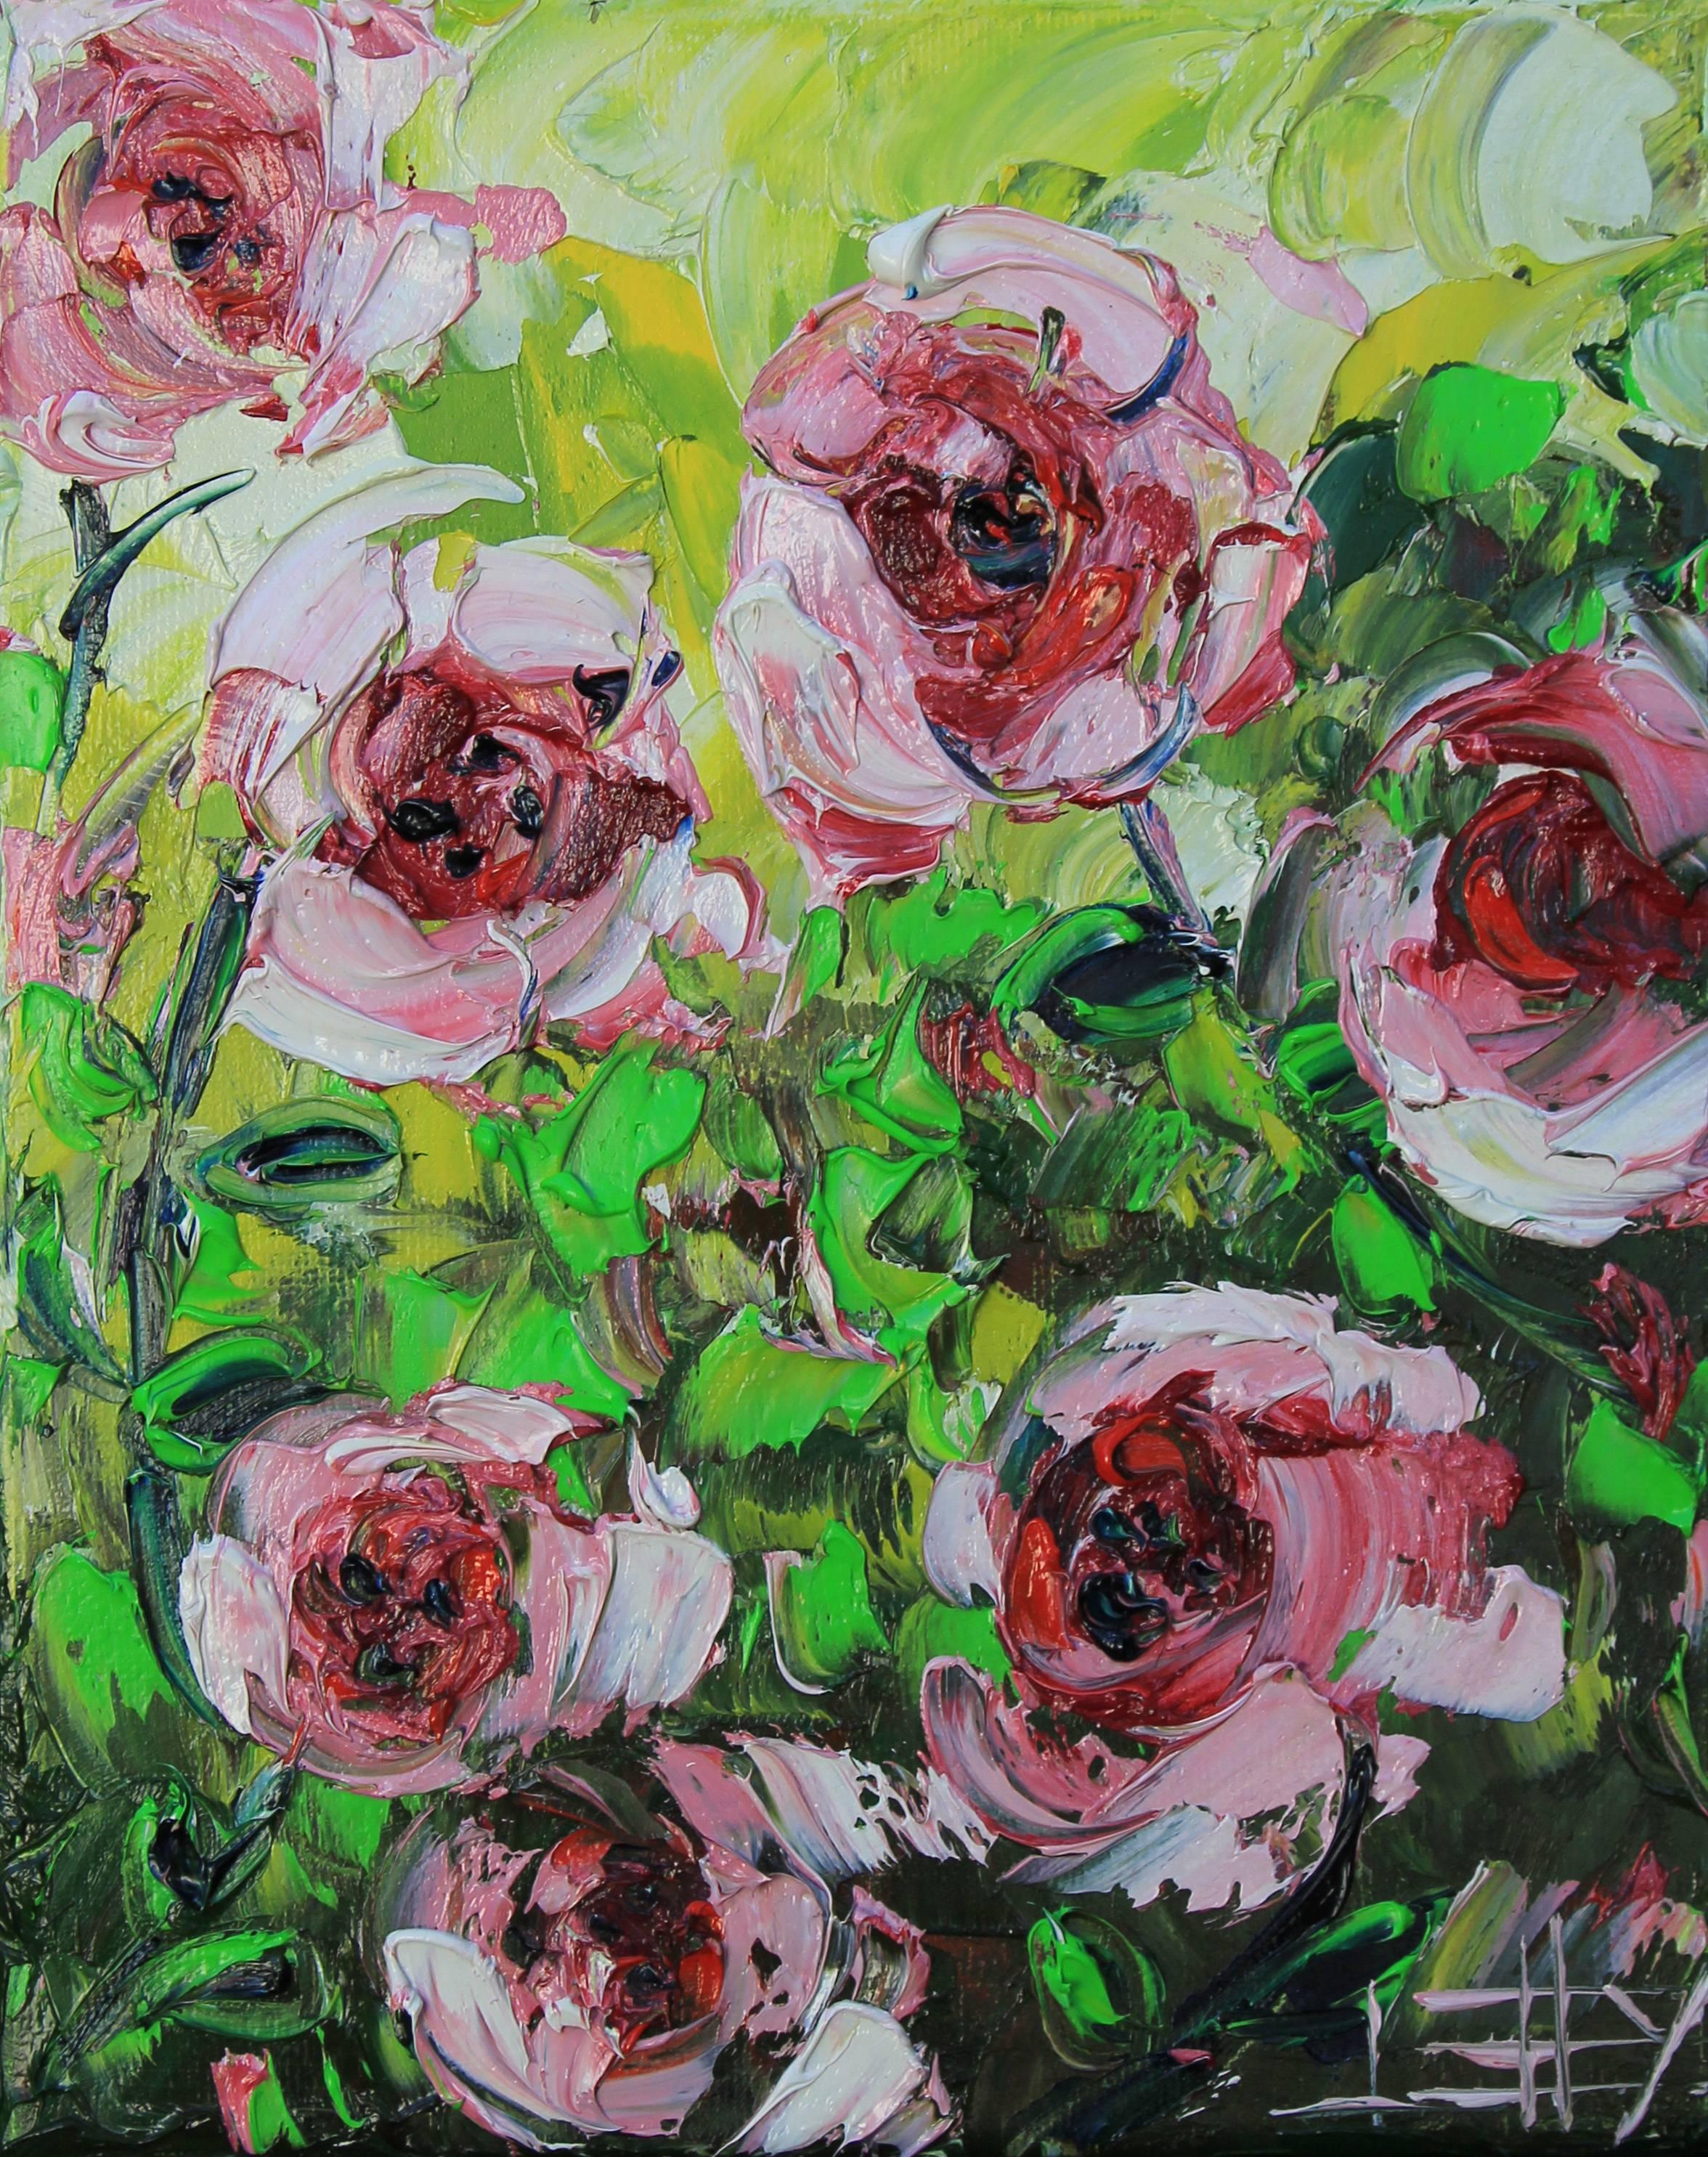 My Garden Song Lisa Elley Oil painting on stretched canvas
One-of-a-kind
Signed on front and back
2017
8 in. h x 10 in. w x 1 in. d
0 lbs. 6 oz. Artist Comments 
Flowers are a perfect subject for the palette knife. I create nuances and texture with